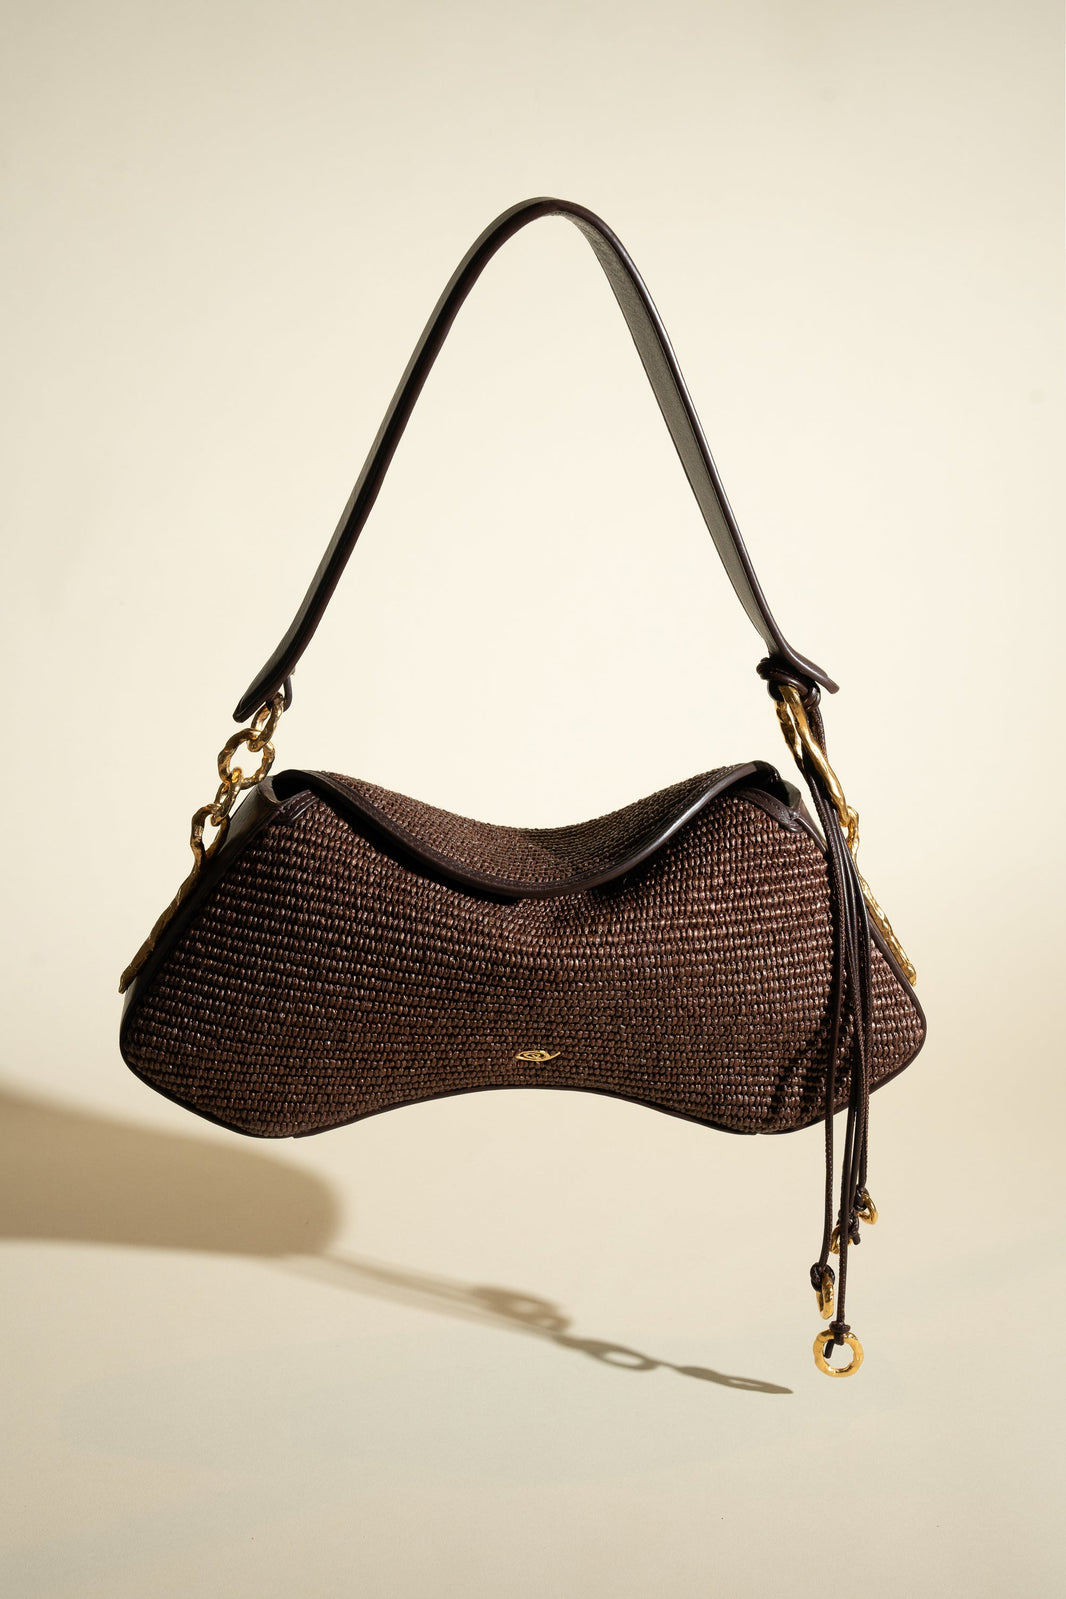  Deià handmade in Woven Natural Raffia and Nappa Leather Trim senderkis black chocolate front view